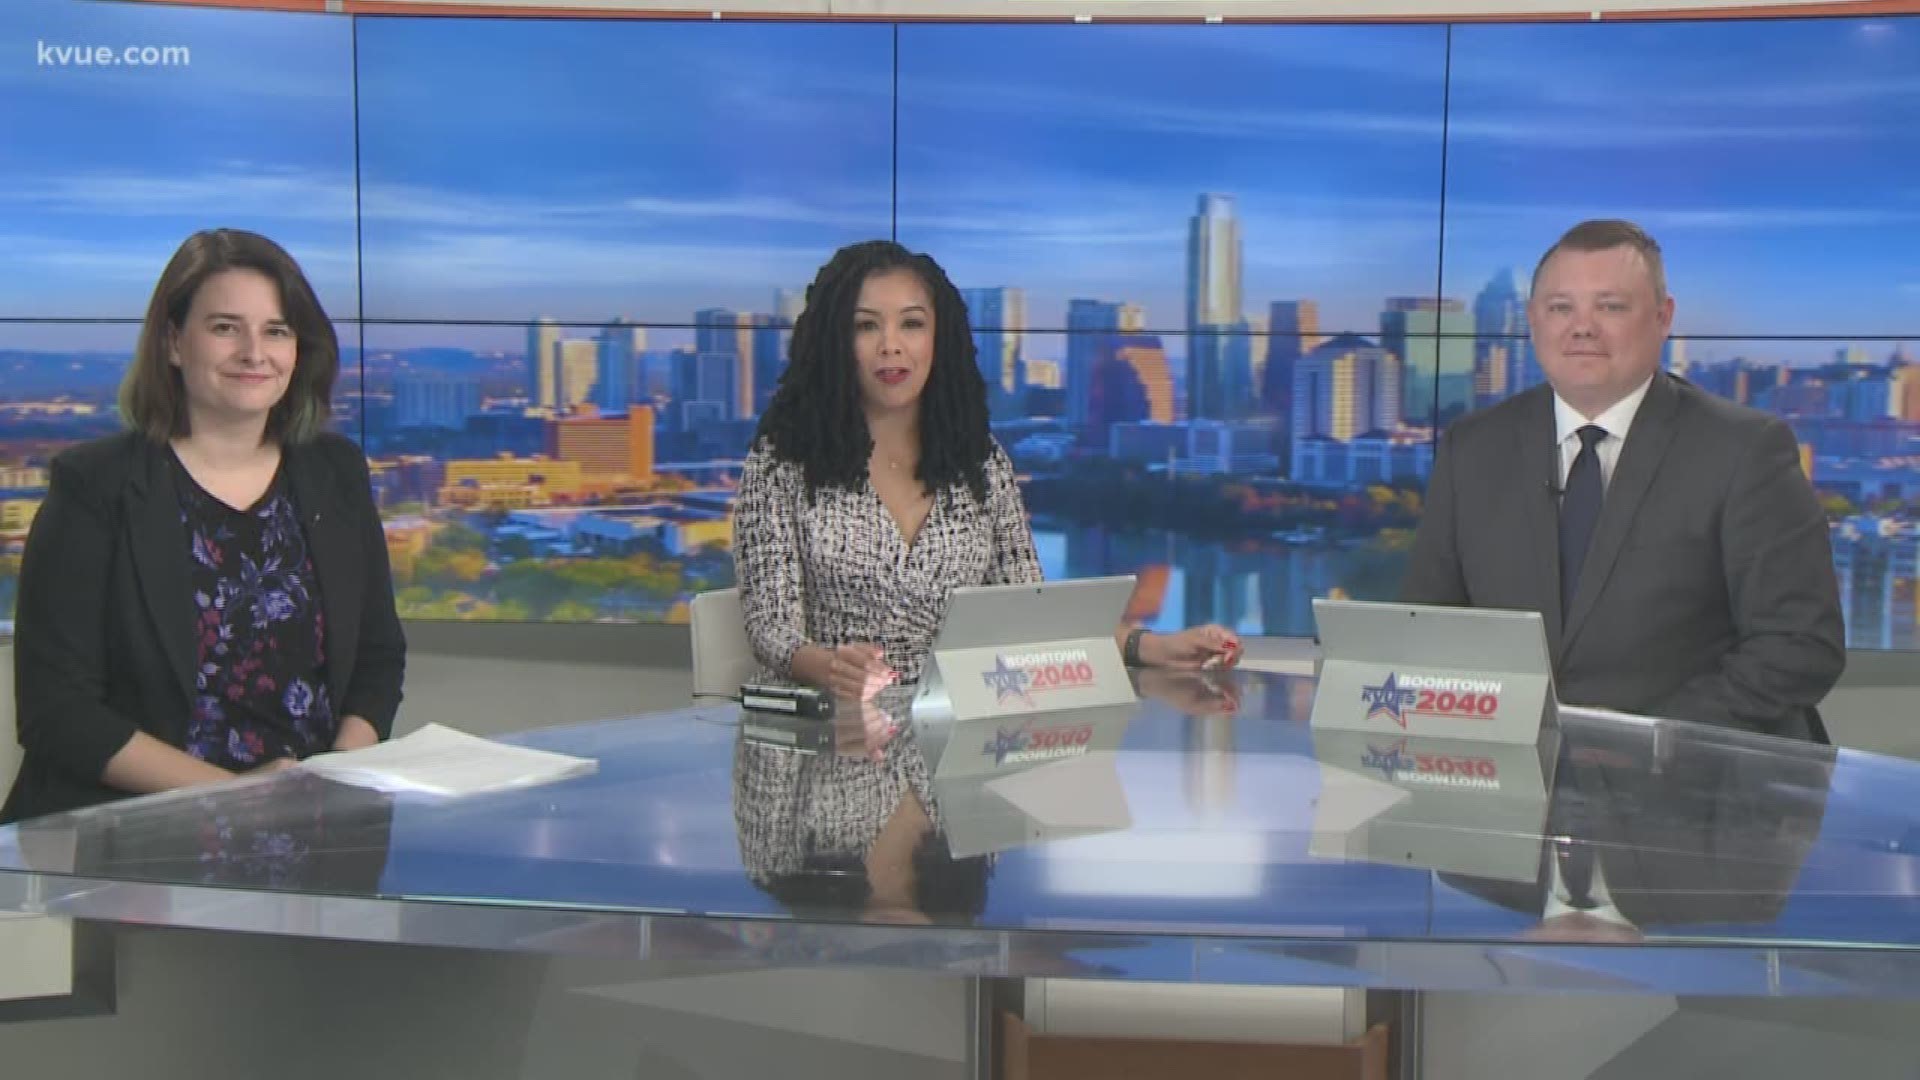 It’s now time for our weekly political segment: Texas Face Off. Joining KVUE is Tara Pohlmeyer, who is the communications manager with Progress Texas and Matt Mackowiak, who is the chairman of the Travis County Republican Party.